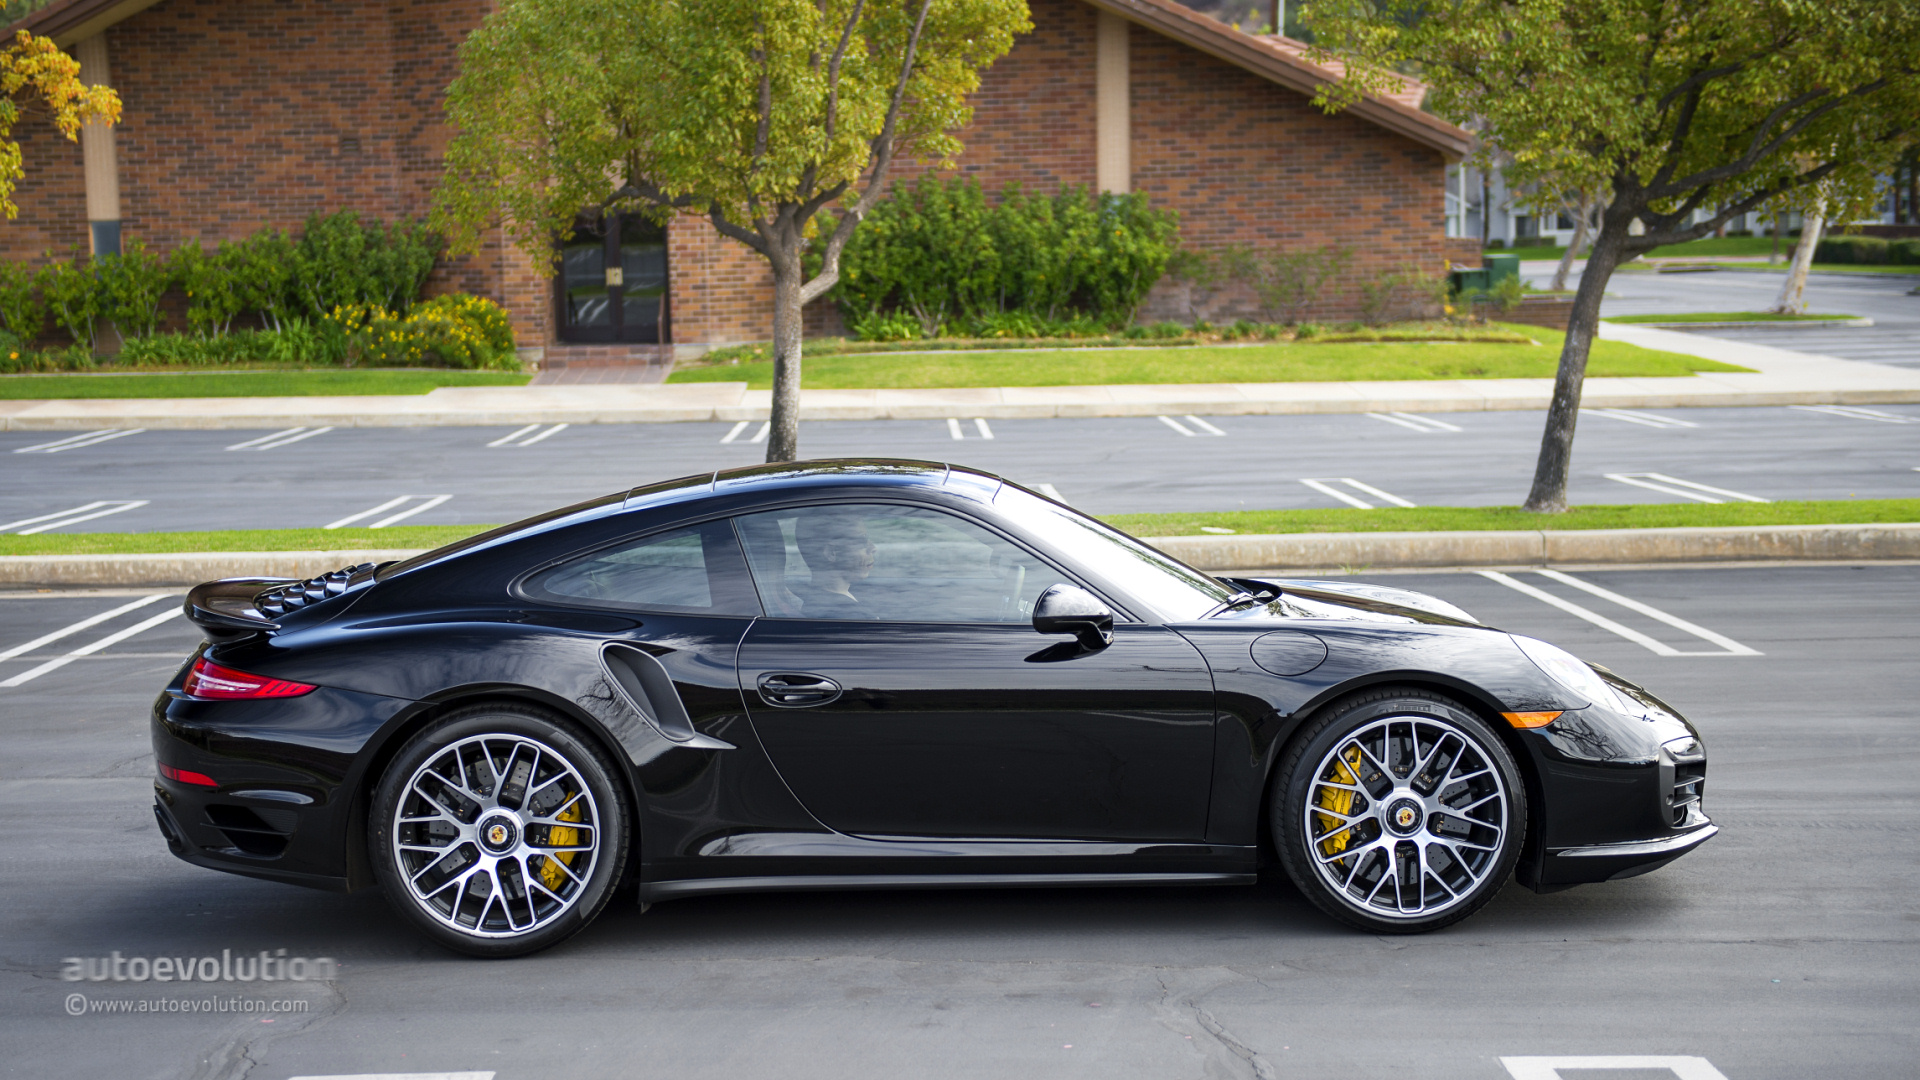 United States AI Solar System (7) - Page 33 2014-porsche-911-turbo-s-review-2014_55